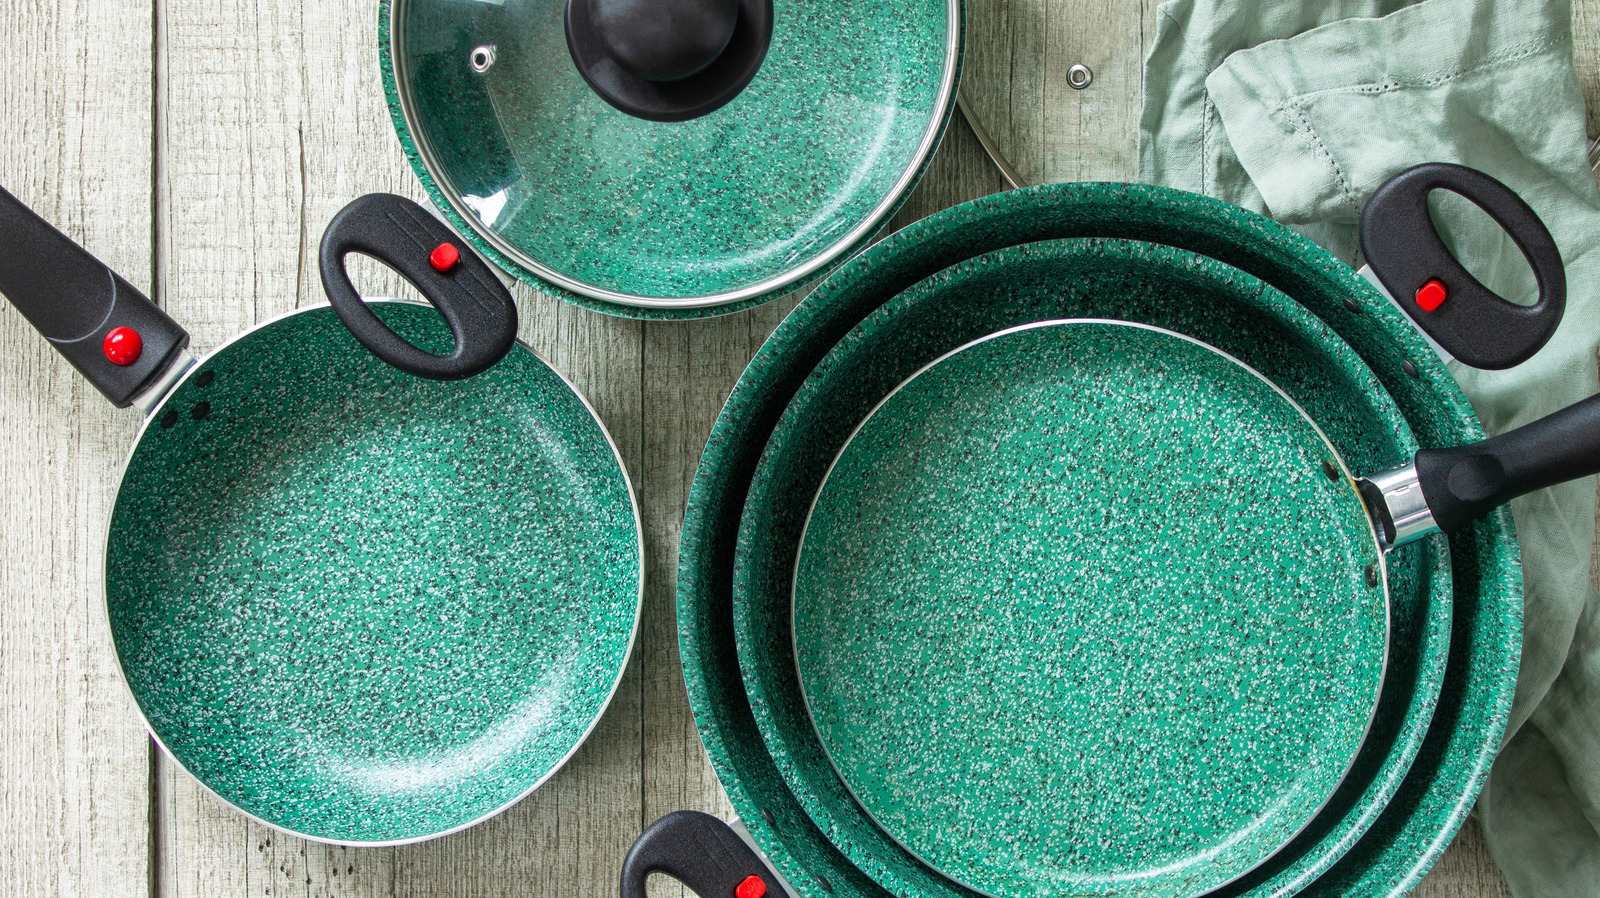 All you need to know about granite cookware